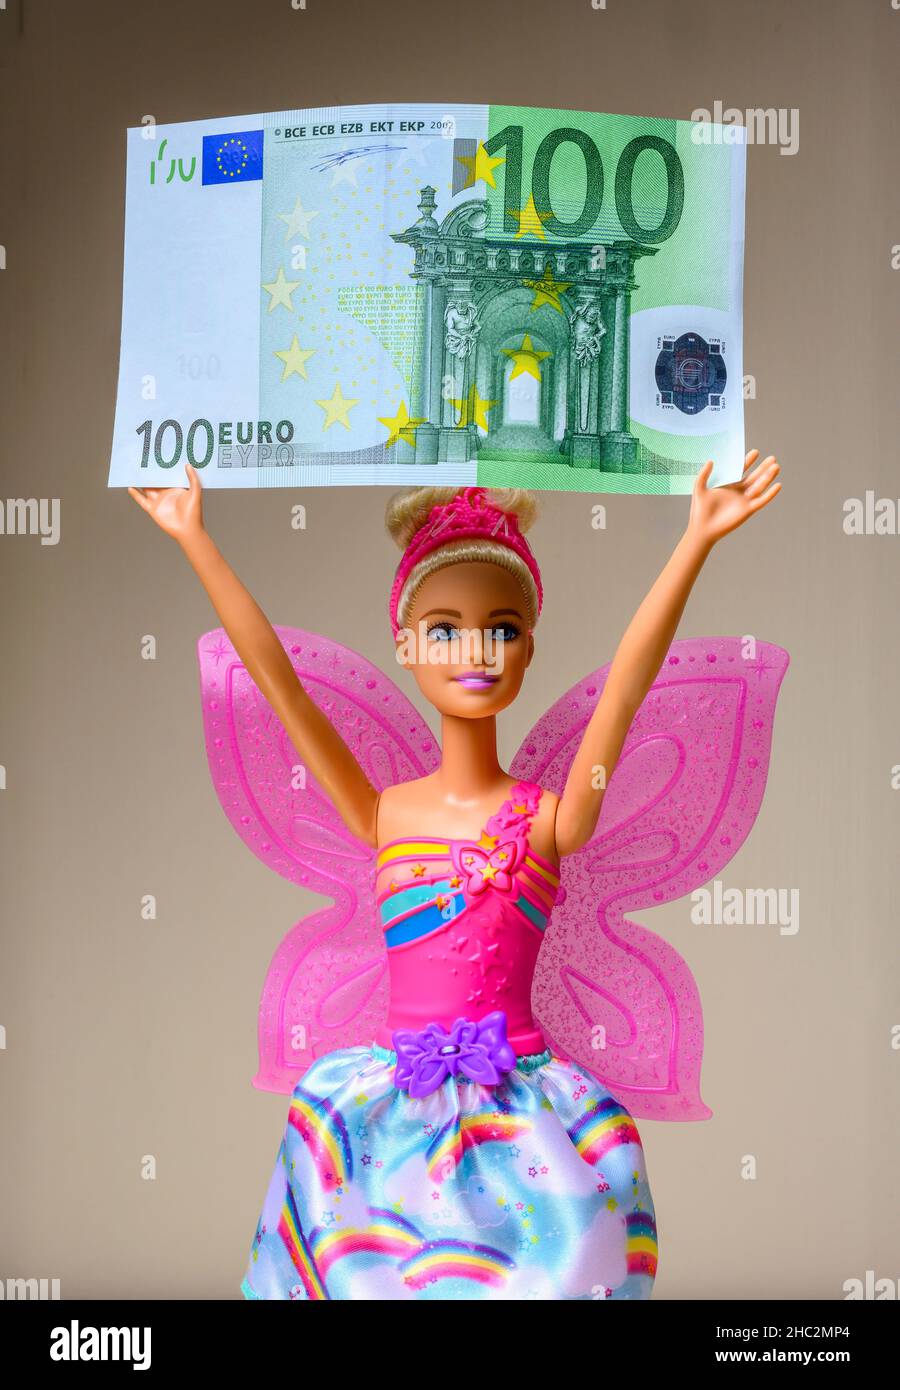 Barbie doll holding a 100 Euro banknote, Stock Photo